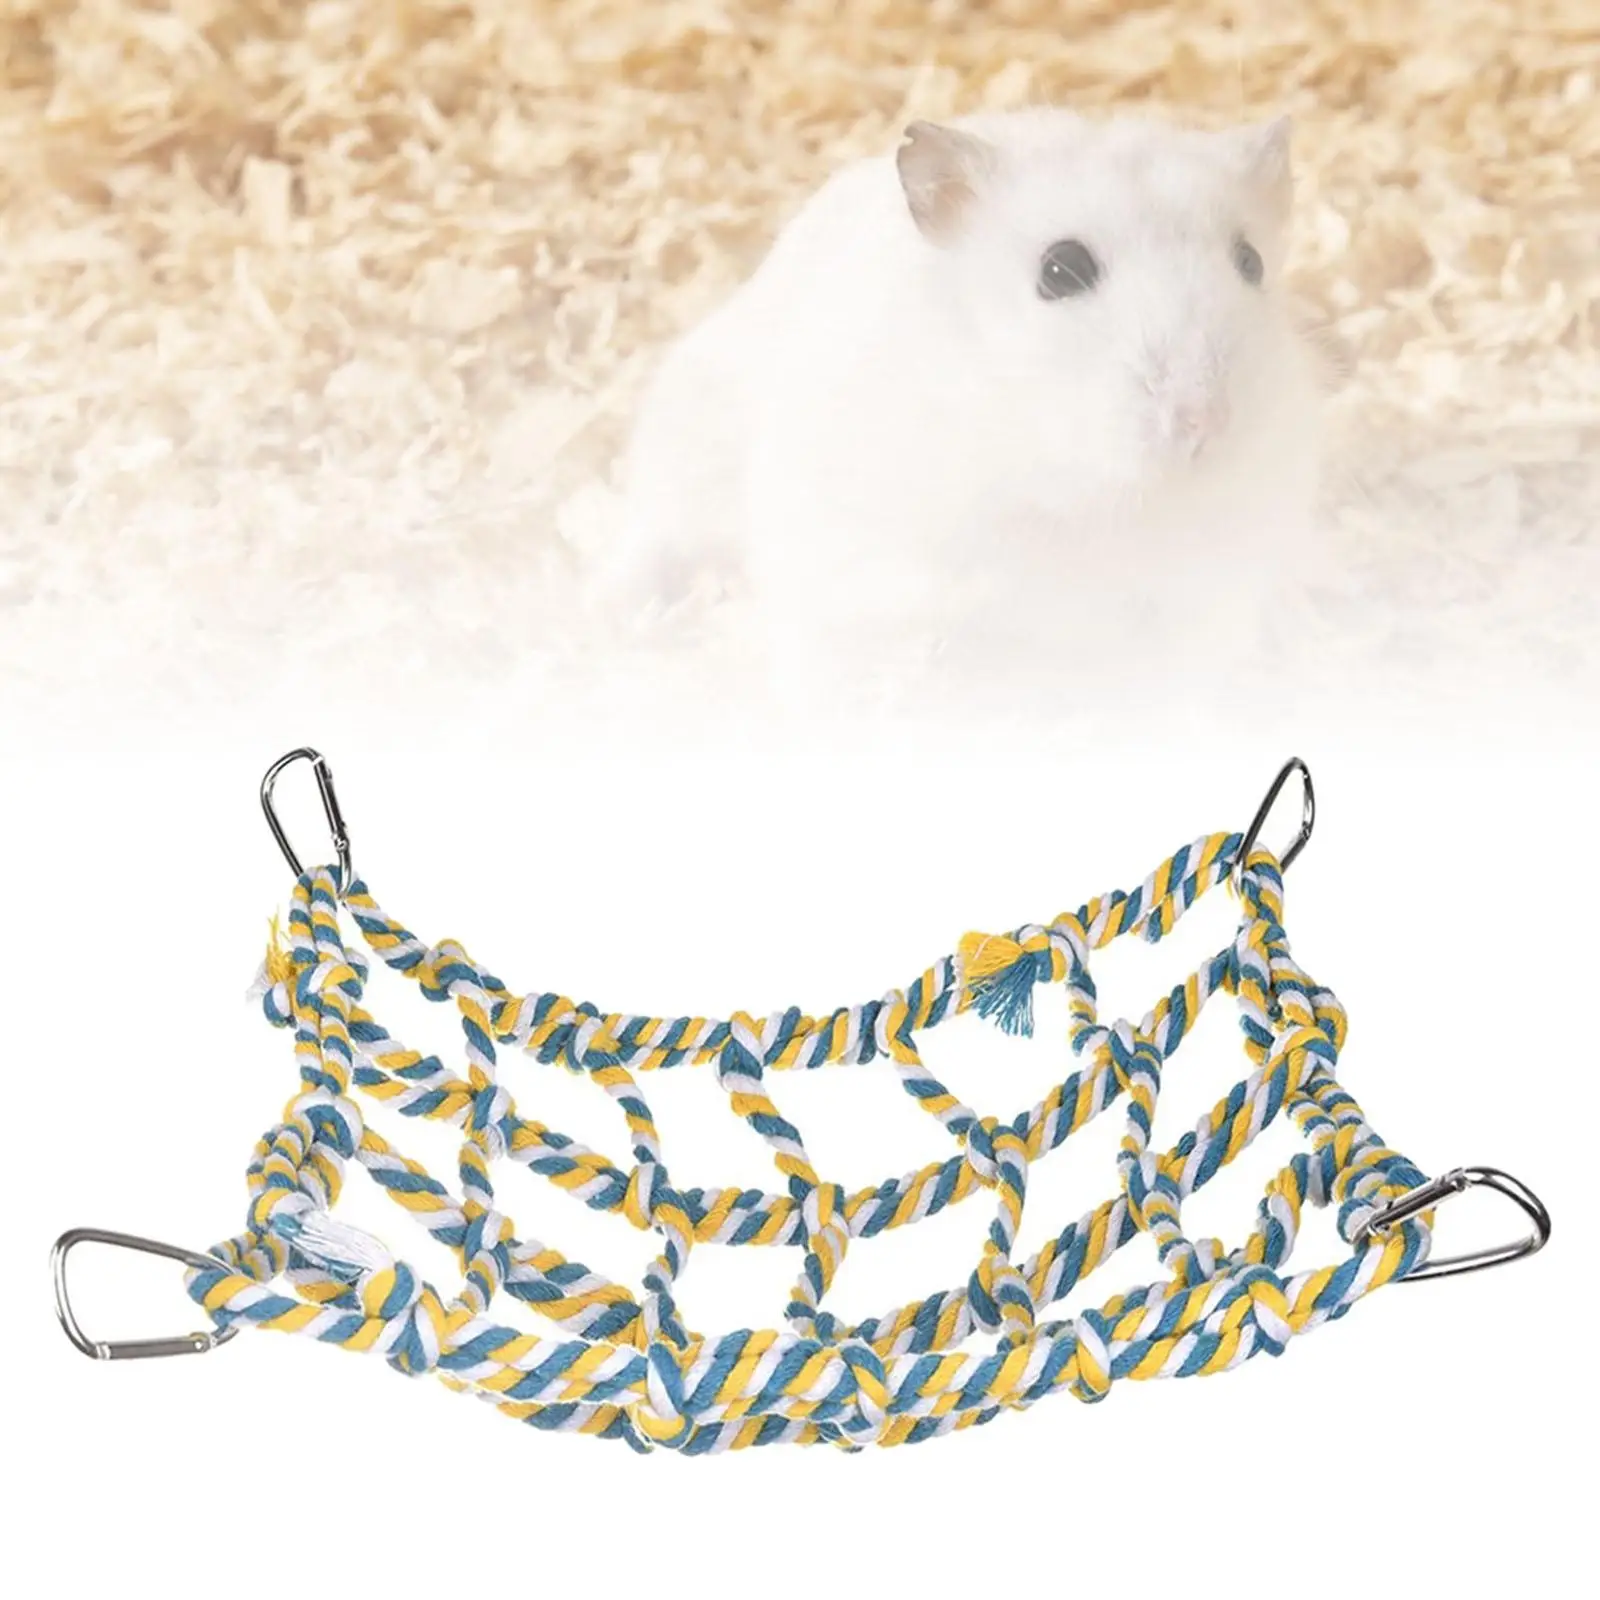 Hamster Hammock rope Hanging Swing Rope Cage Toys Easy to Install Climbing Net for Pet Parrot Lovebirds Small Bird